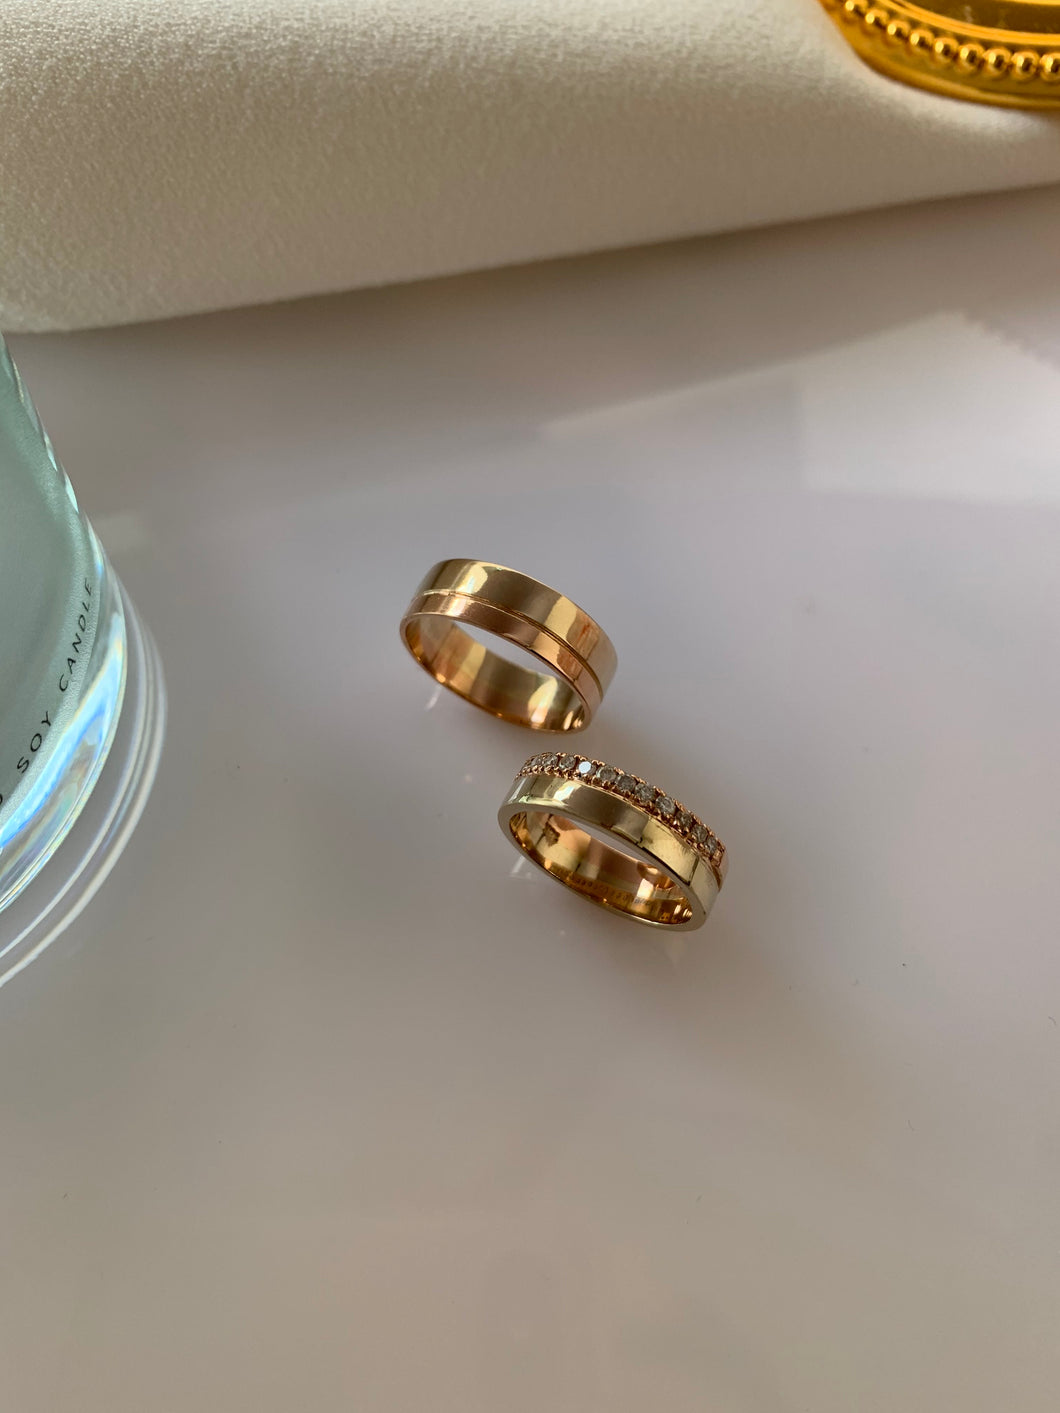 Yellow gold wedding rings. For the bride, the half of the upper ring is surrounded by brilliant small diamonds. For the groom, a classic yellow gold ring brishedd off at the top.